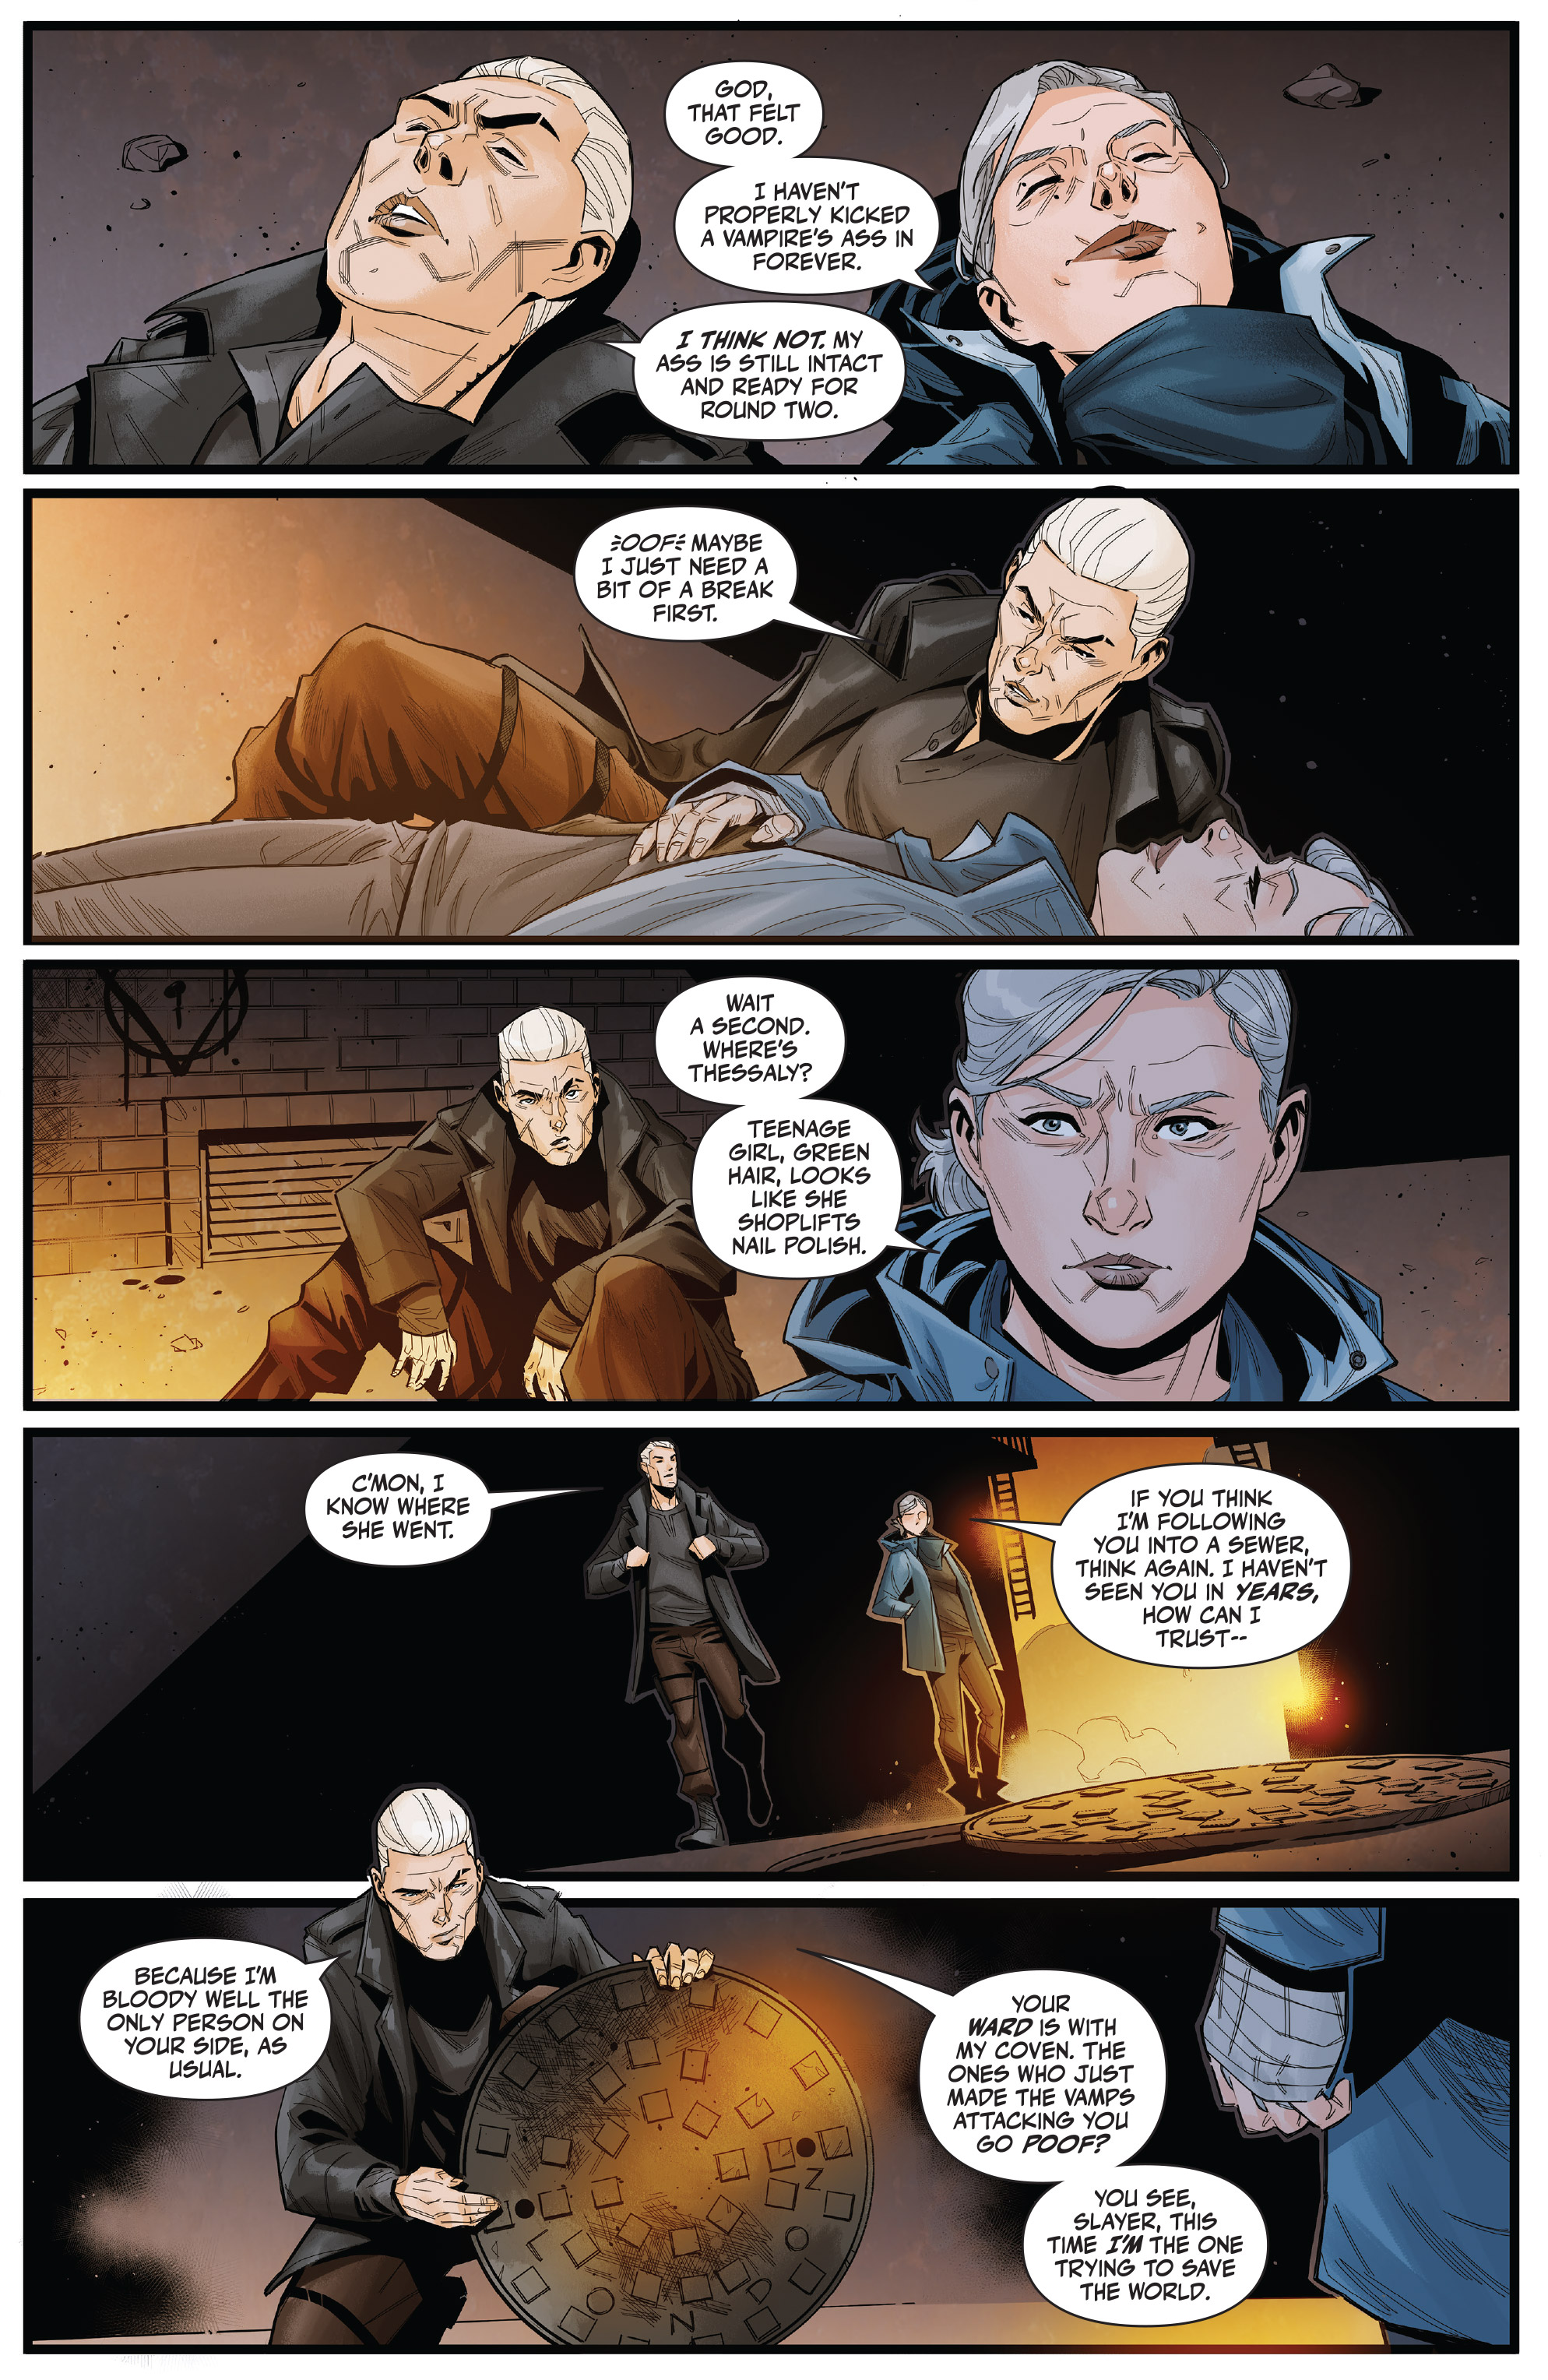 Buffy the Last Vampire Slayer (2021-): Chapter 3 - Page 4